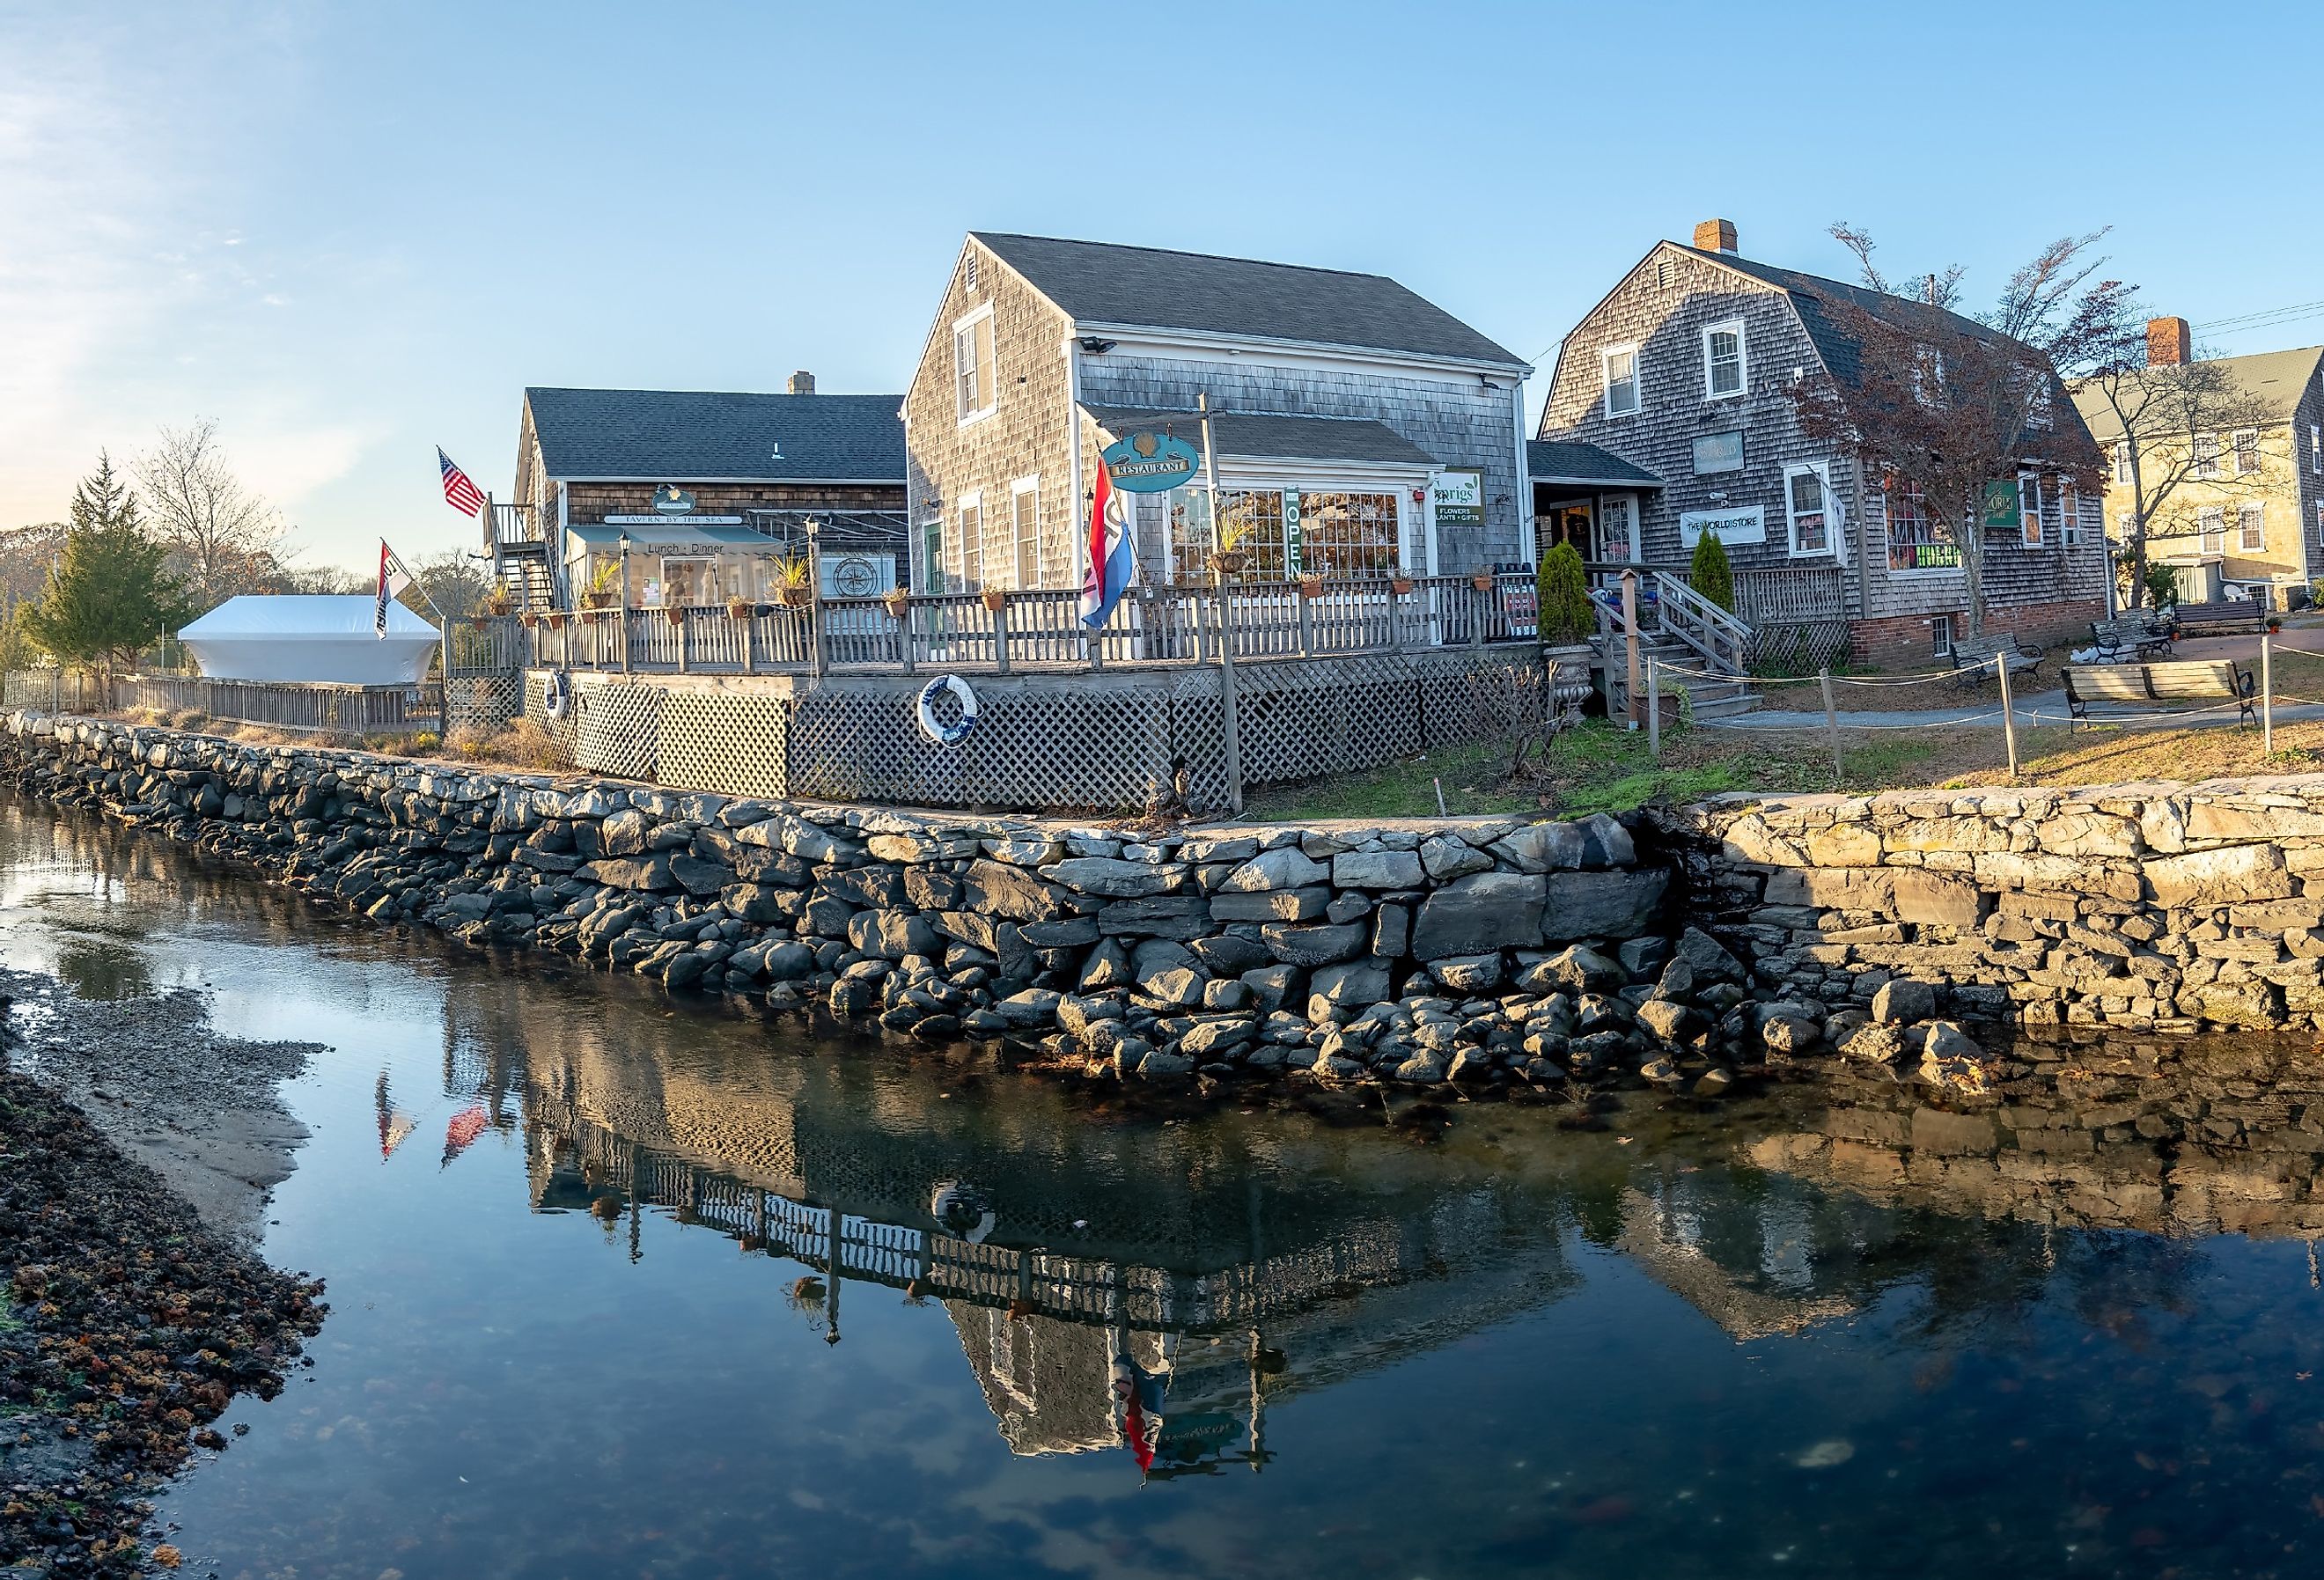 Homes along the waterfront in Wickford, North Kingstown, Rhode Island.